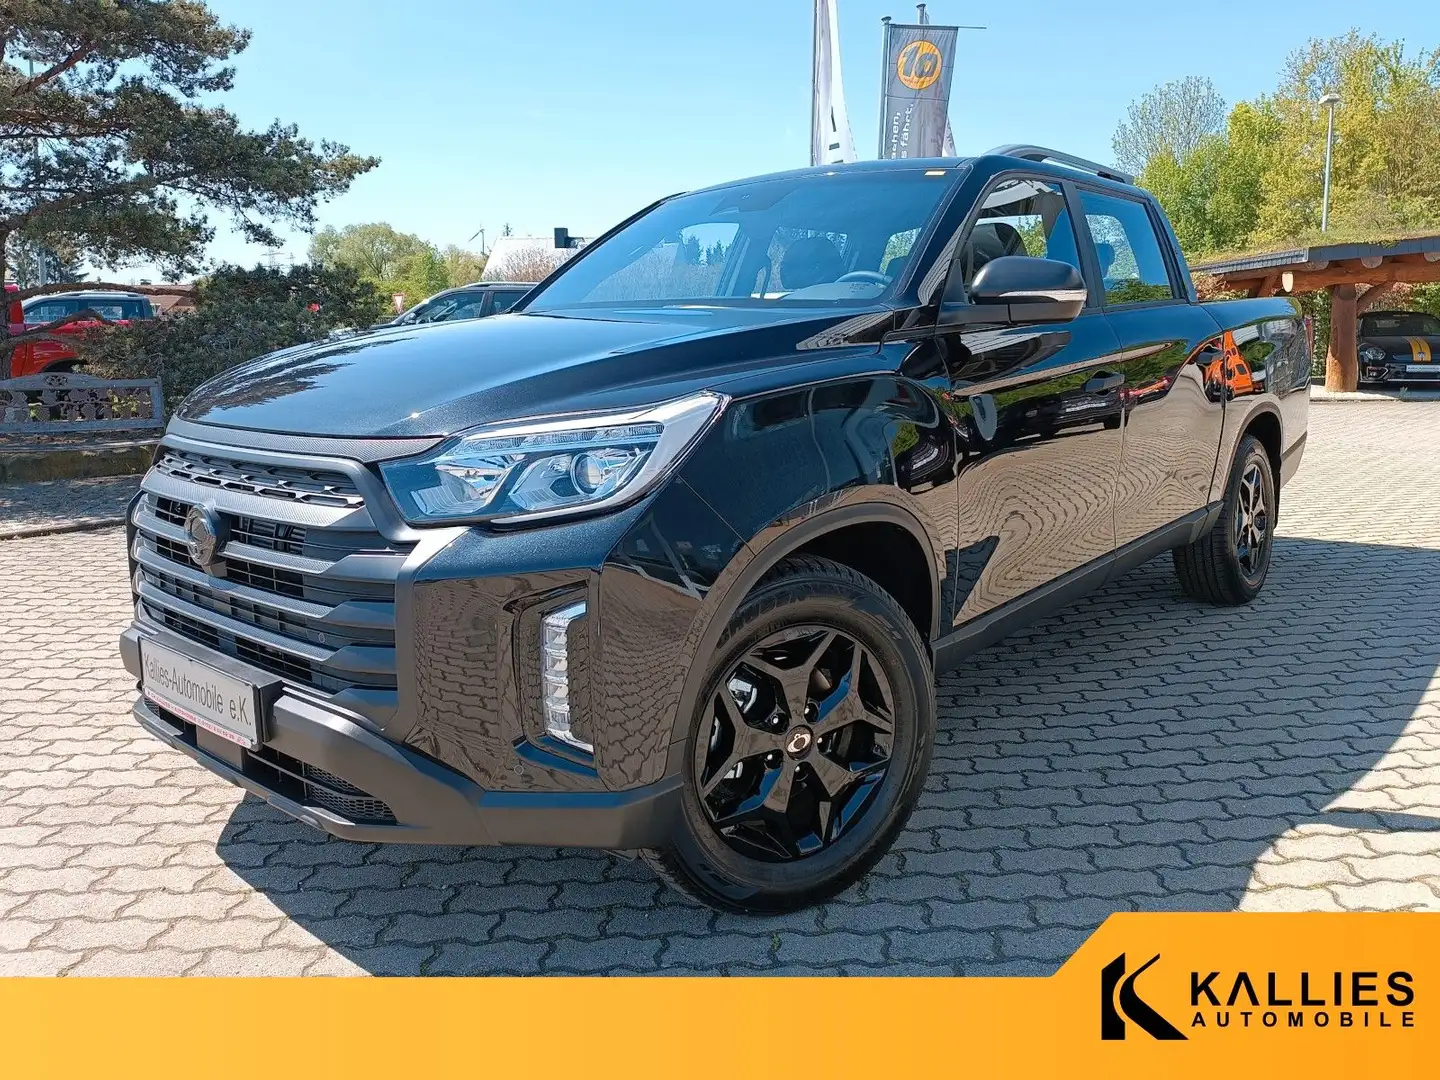 SsangYong Musso Musso 2.2d 202PS AT 4x4 LEDER+XENON+SD+DIF Siyah - 1